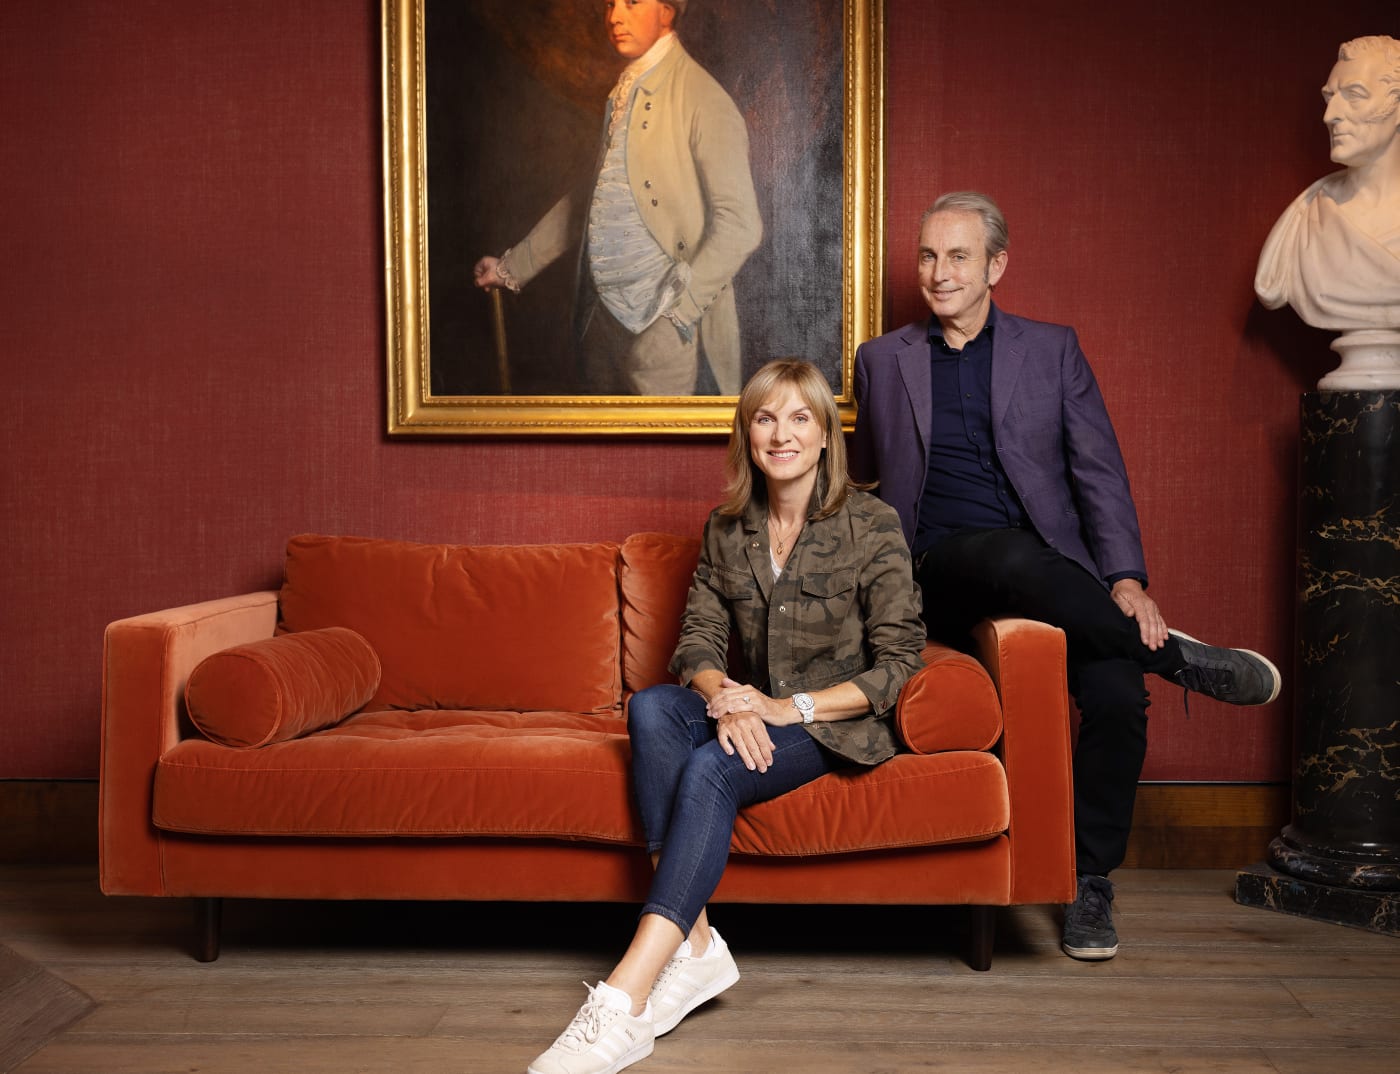 fiona bruce and philip mould sitting on a sofa in a red gallery with a painting